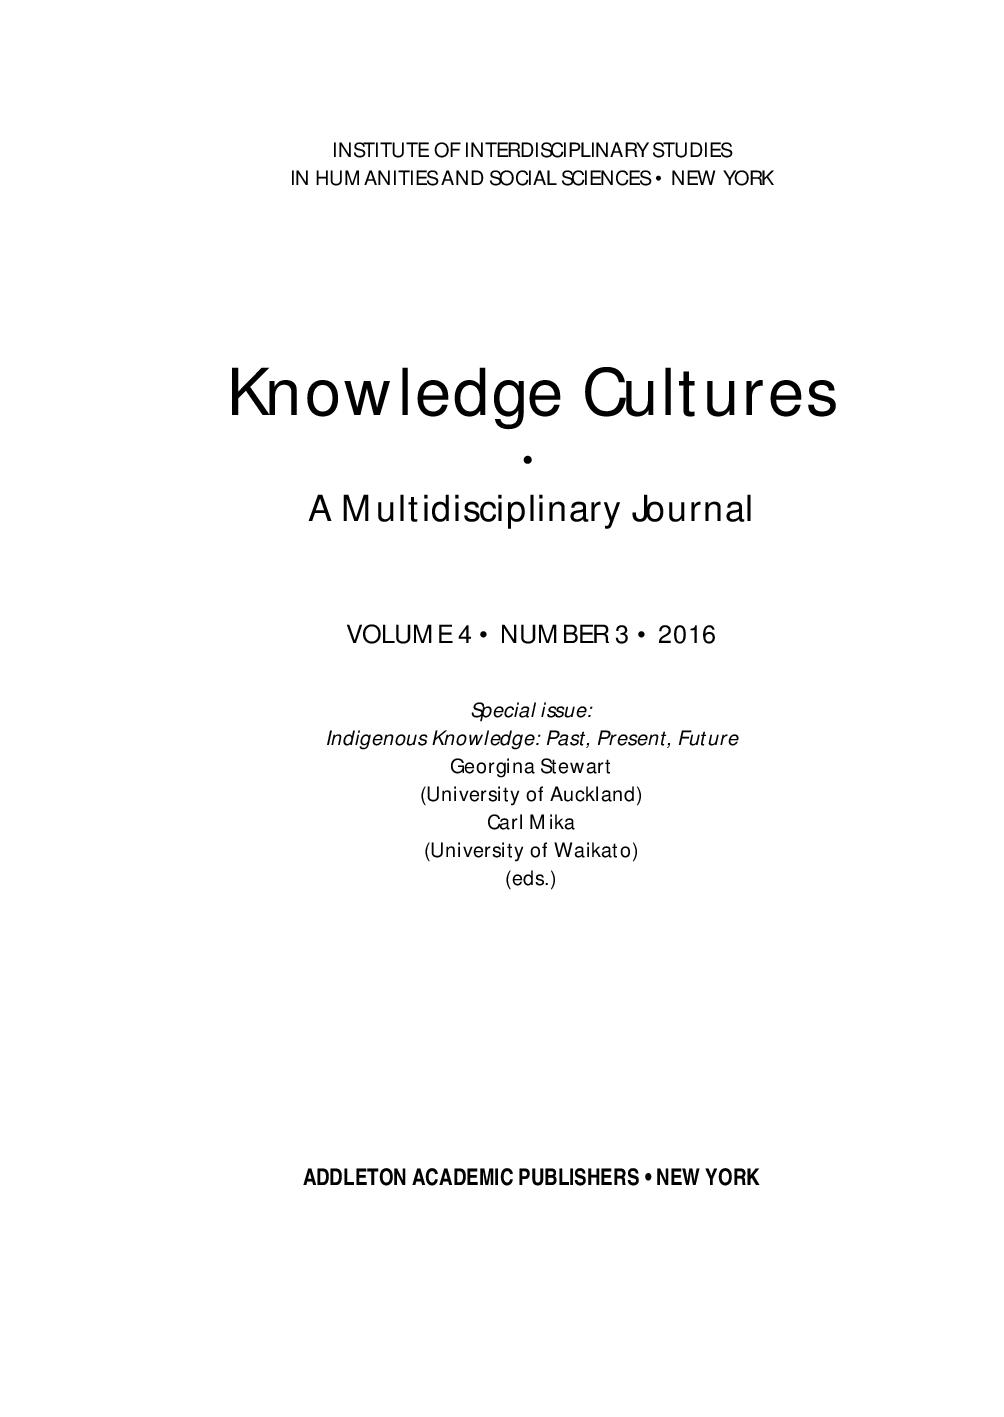 FEATURE ARTICLE: INDIGENOUS KNOWLEDGE, METHODOLOGY AND MAYHEM: WHAT IS THE ROLE OF METHODOLOGY IN PRODUCING INDIGENOUS INSIGHTS? A DISCUSSION FROM MĀTAURANGA MĀORI Cover Image